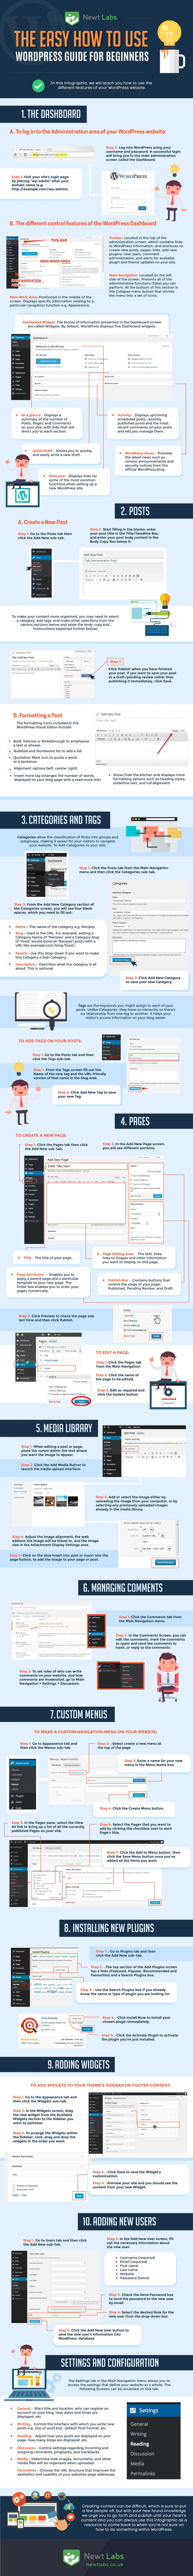 The Easy How To Use WordPress Beginner Guide (Infographic)